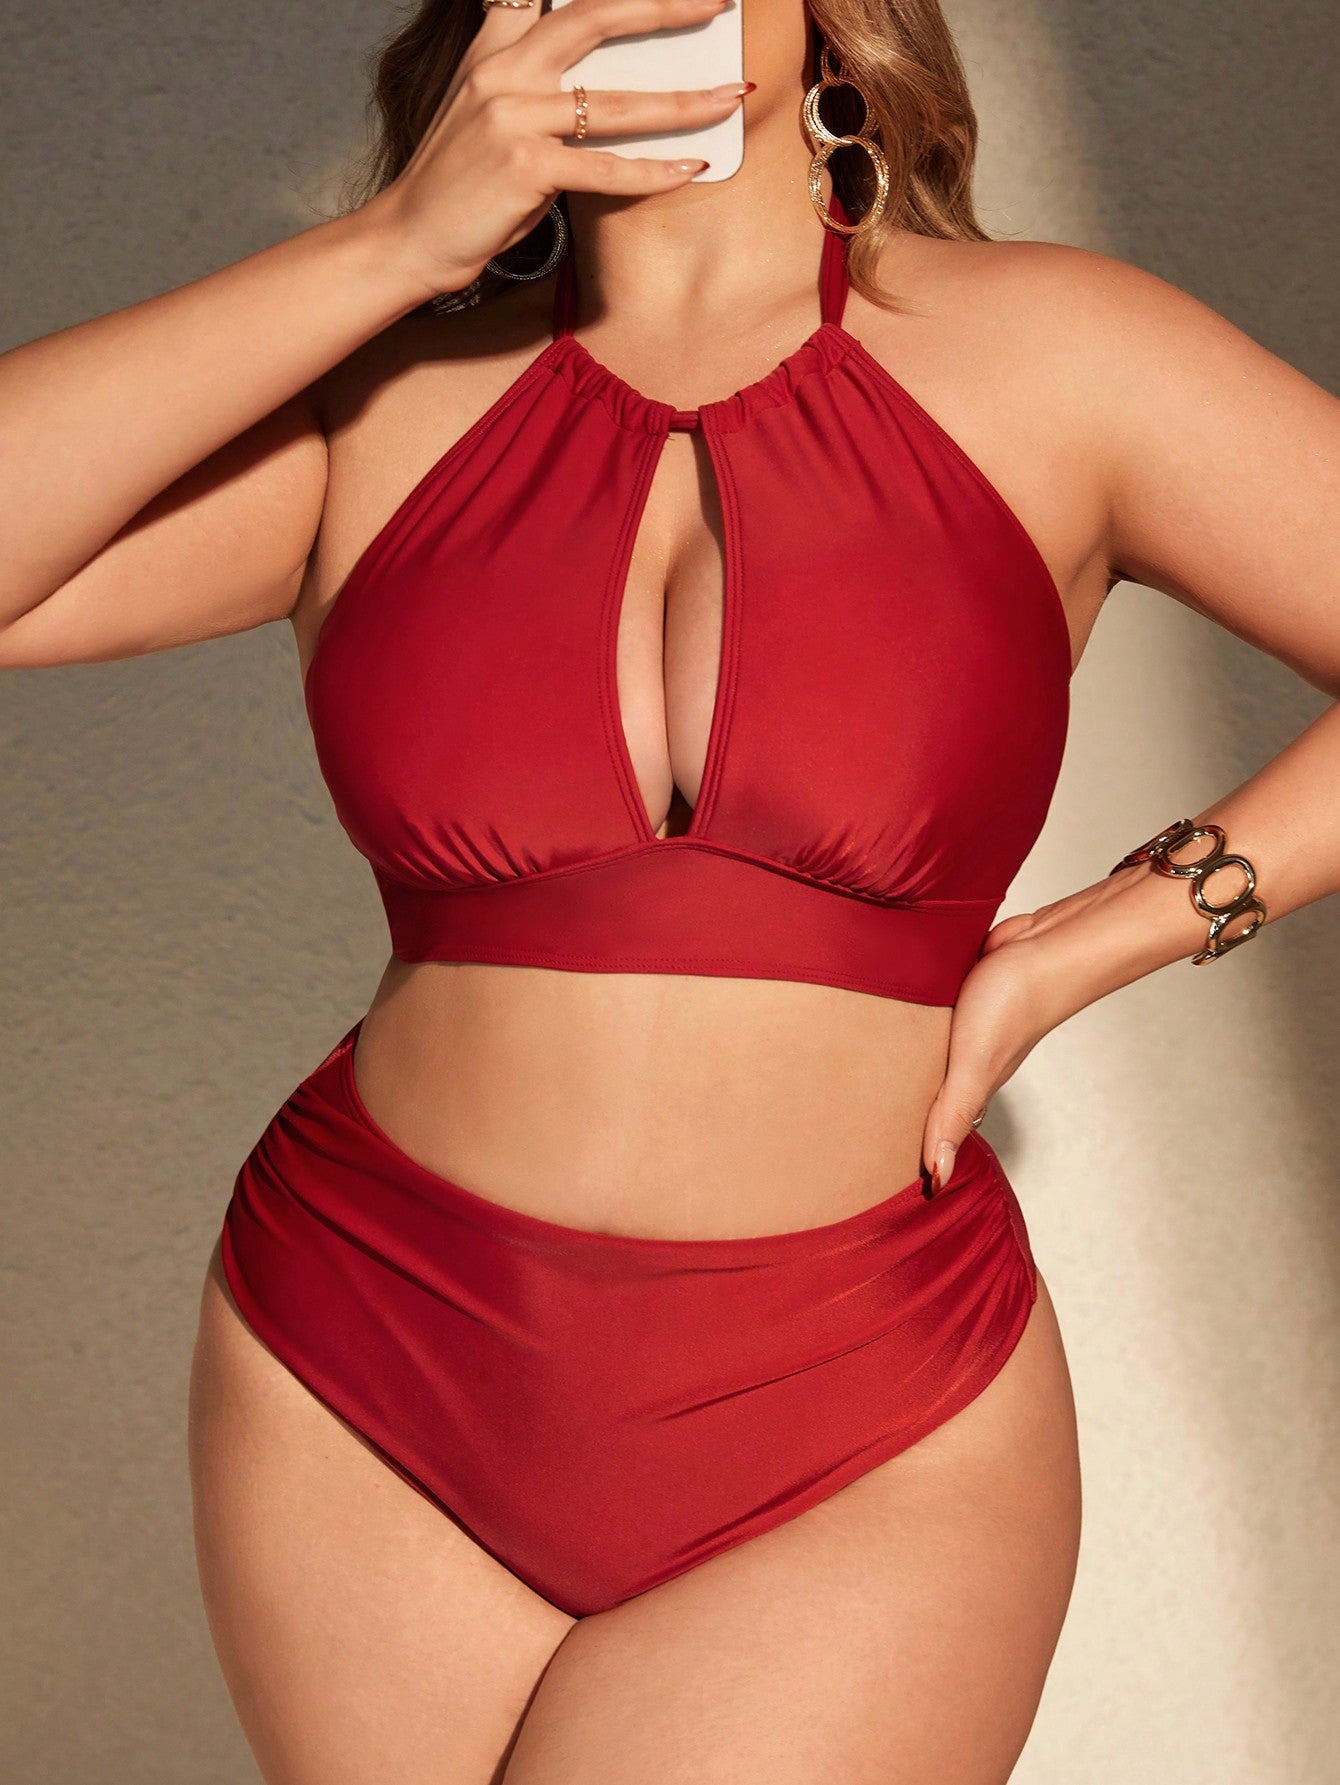 Plus Size Solid Color Ruched Swimsuit Set, High Waisted Two Piece Bikini Swimwear Bathing Suit Beach Outfit Summer Vacation